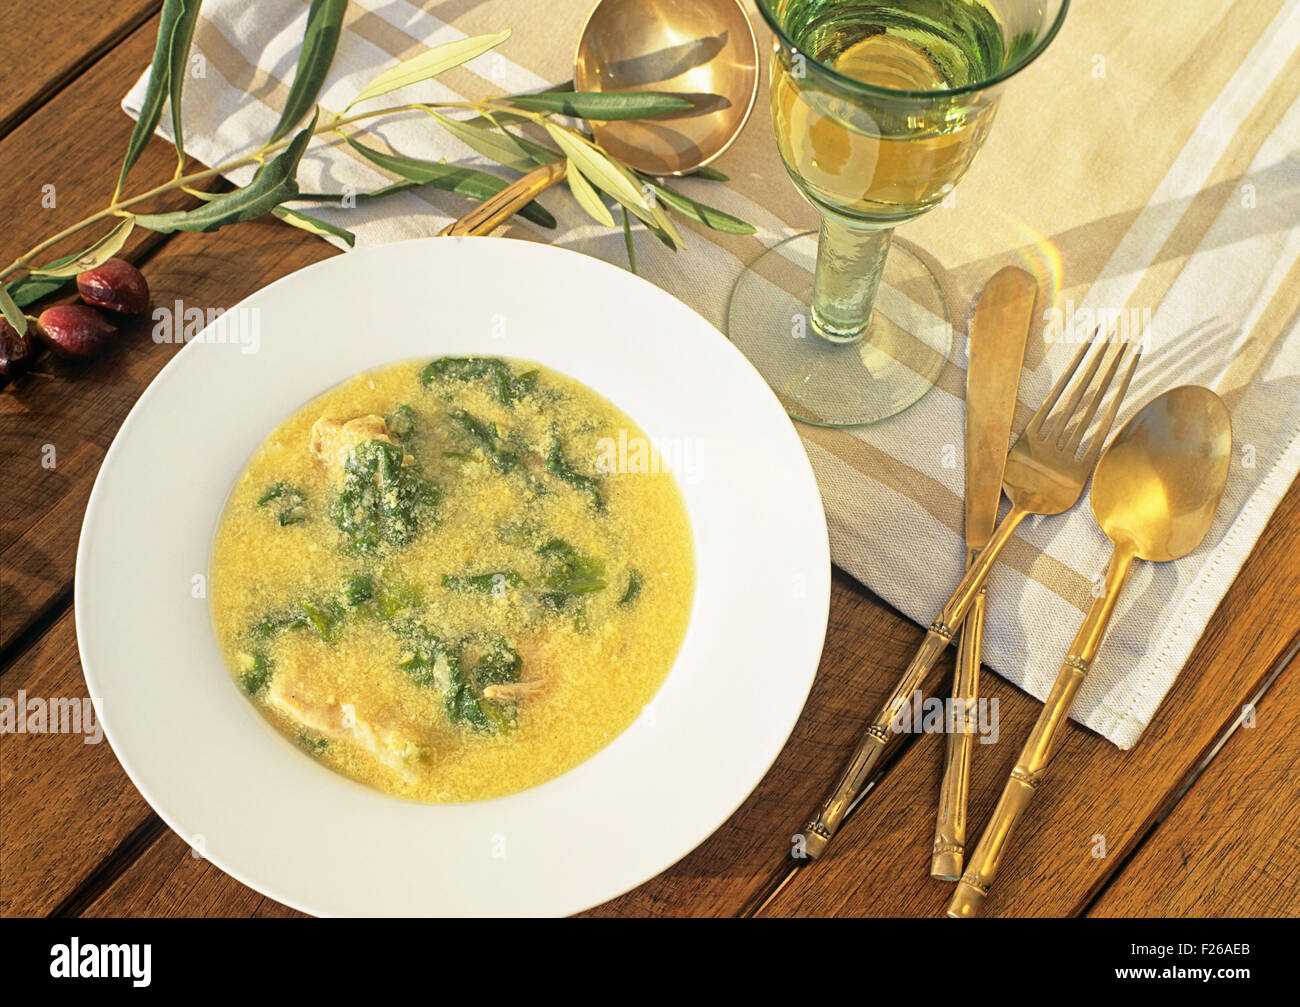 Avgolemono soup - typical Greek soup with chicken, spinach, eggs and lemon Stock Photo